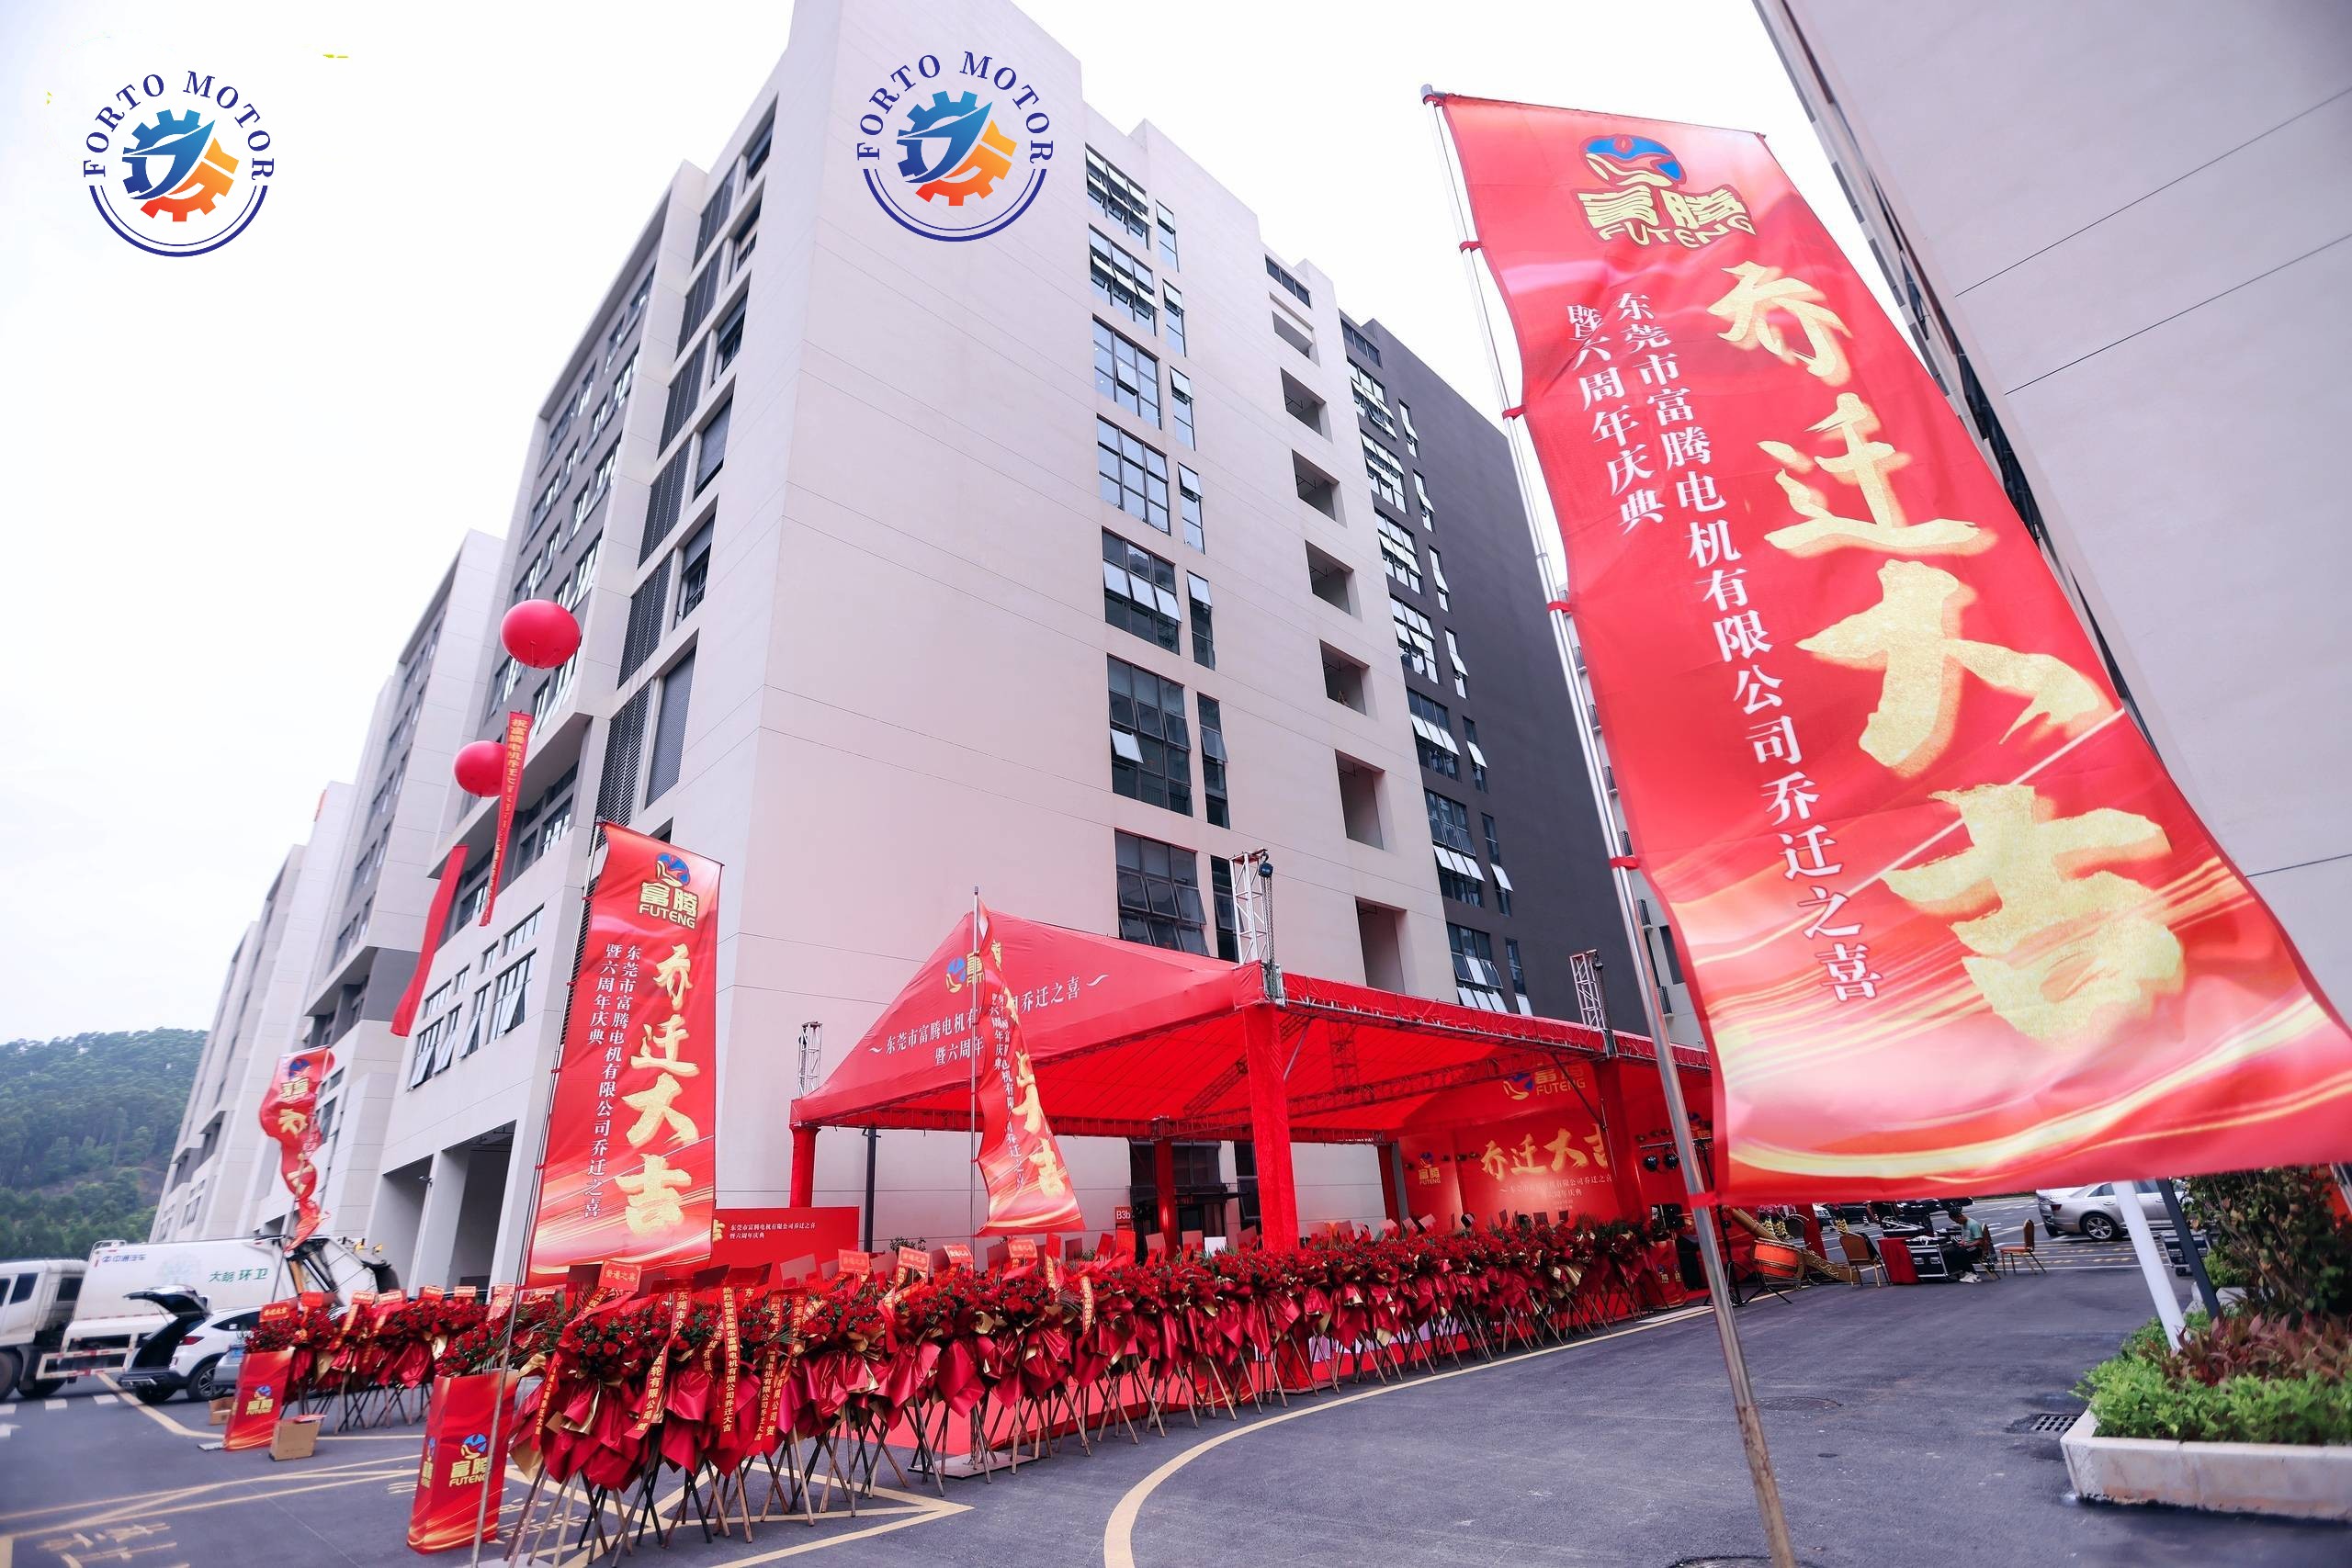 Dongguan Forto Motor Co., Ltd. held a housewarming ceremony in a cheerful atmosphere on October 20, 2023, and celebrated the company’s sixth anniversary.